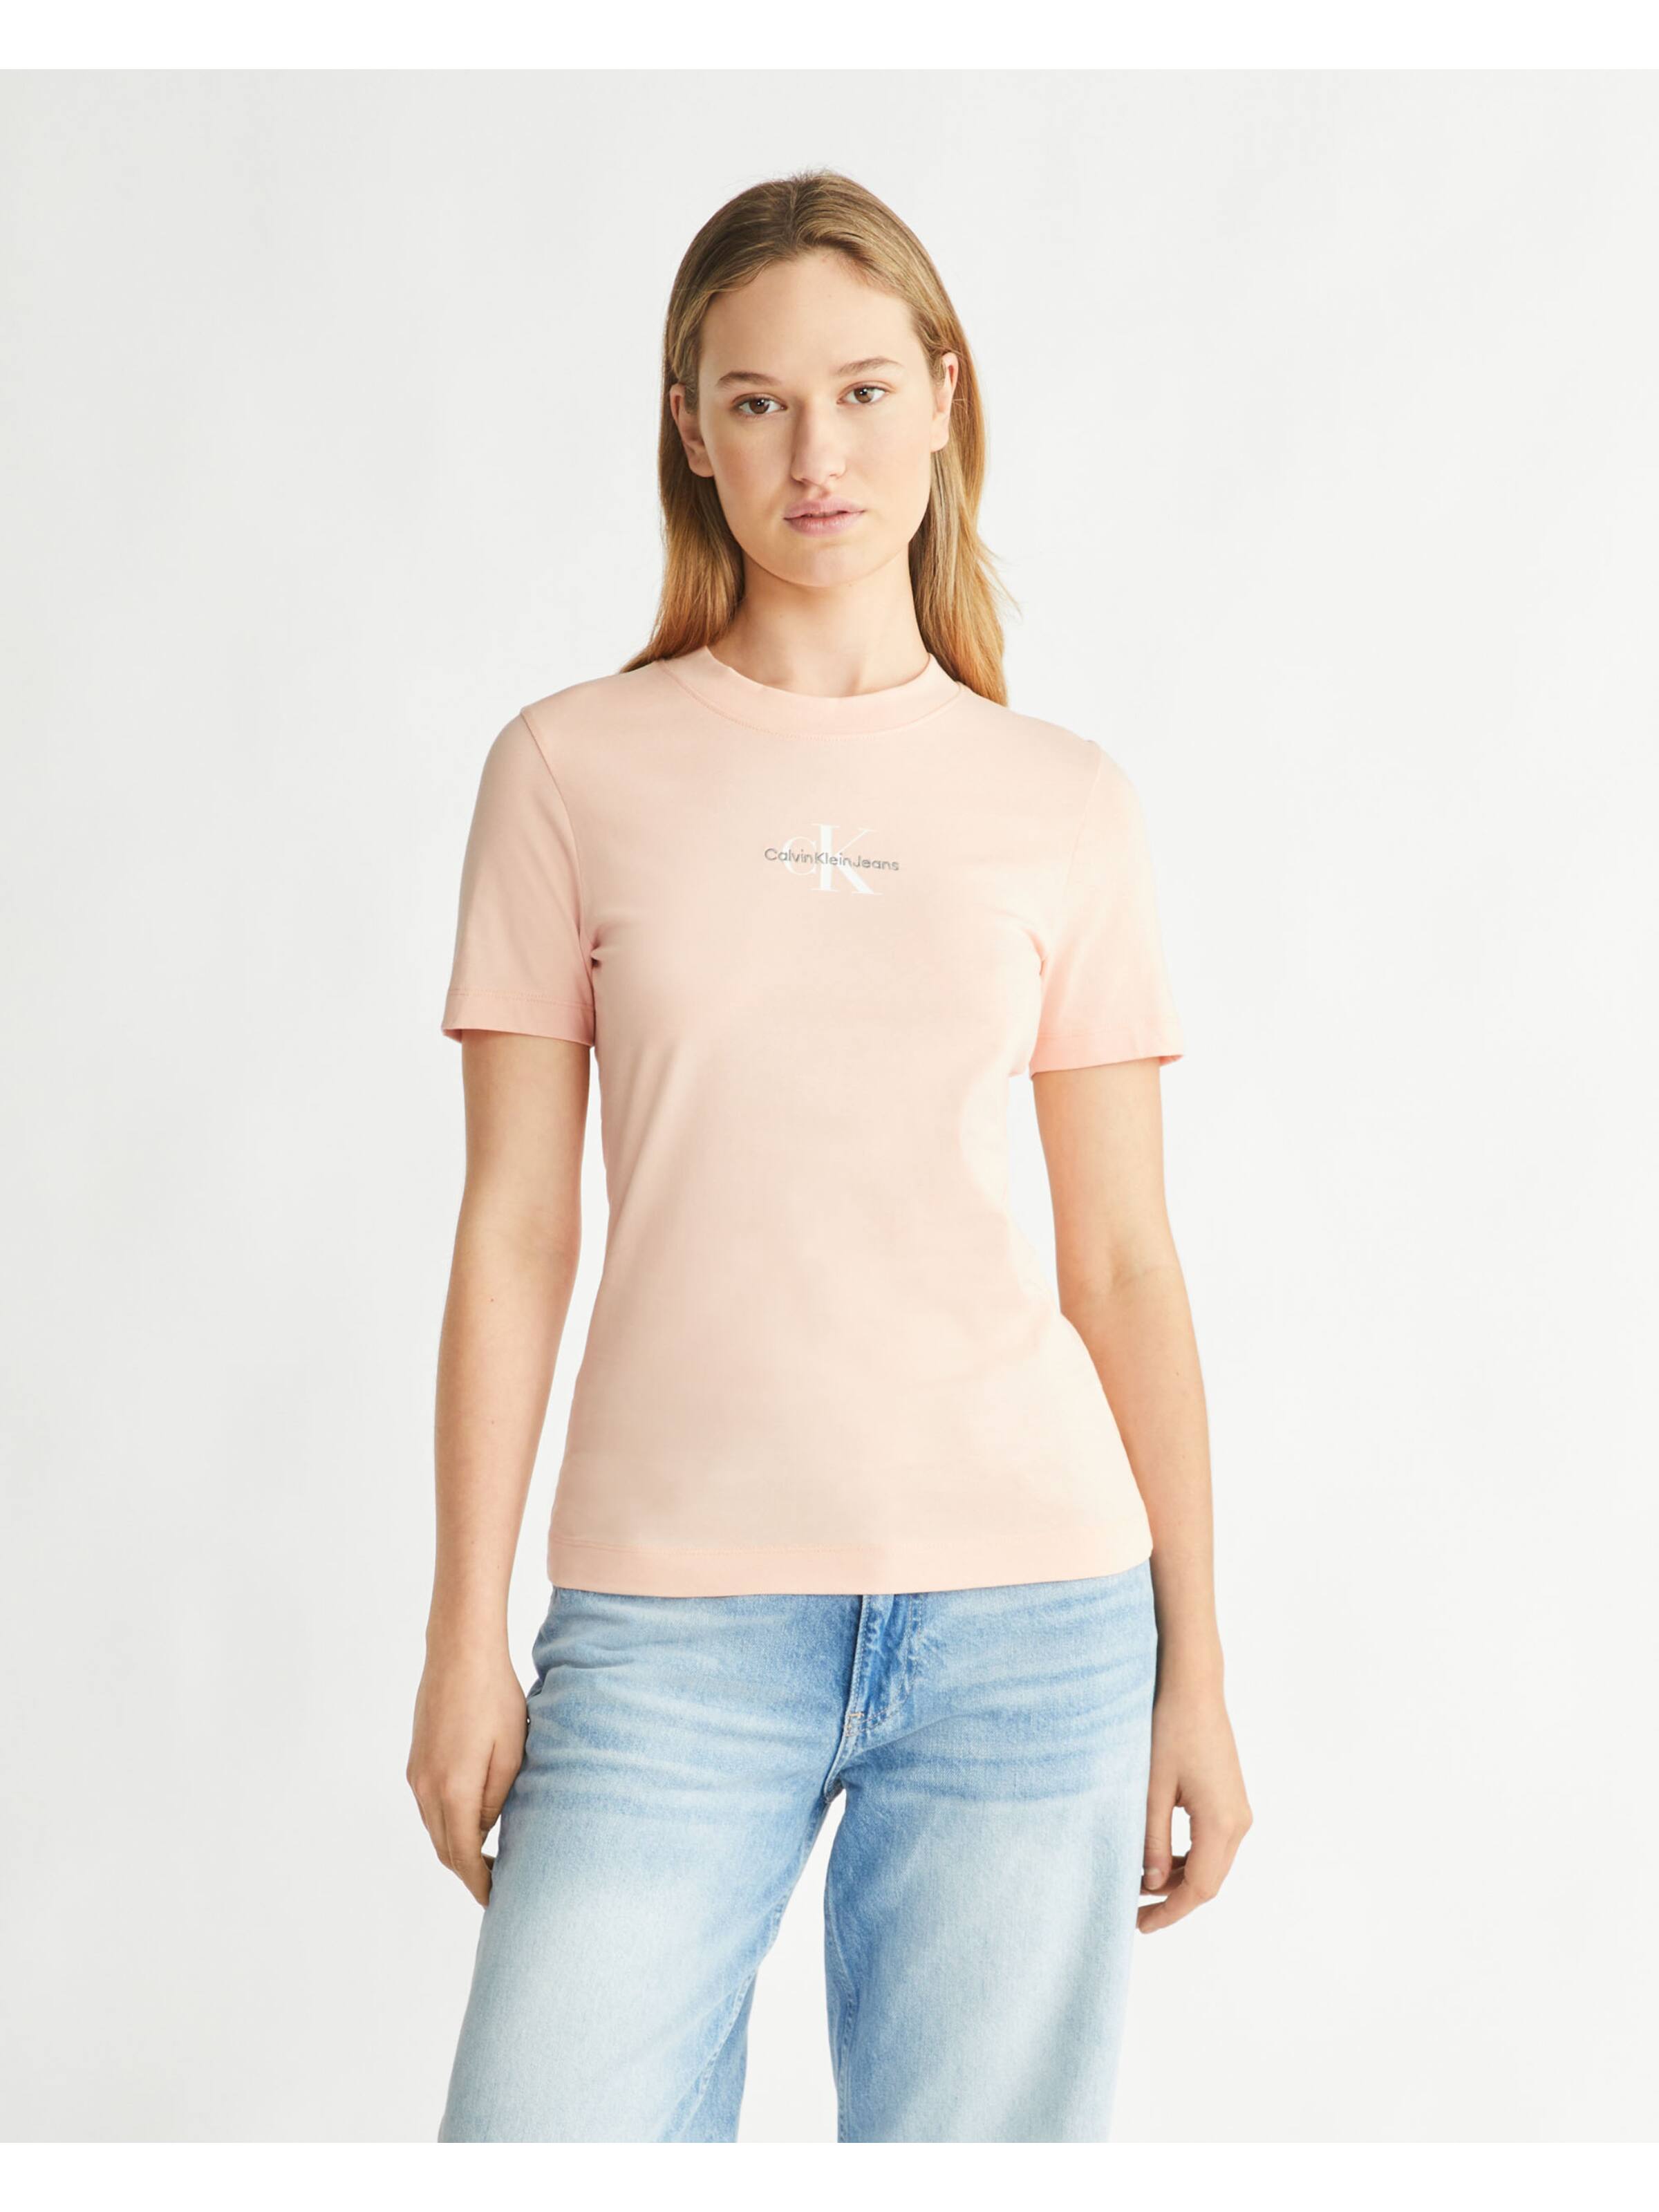 Tee Fit Blossom - Online Just Jeans Slim Faint In Monologo